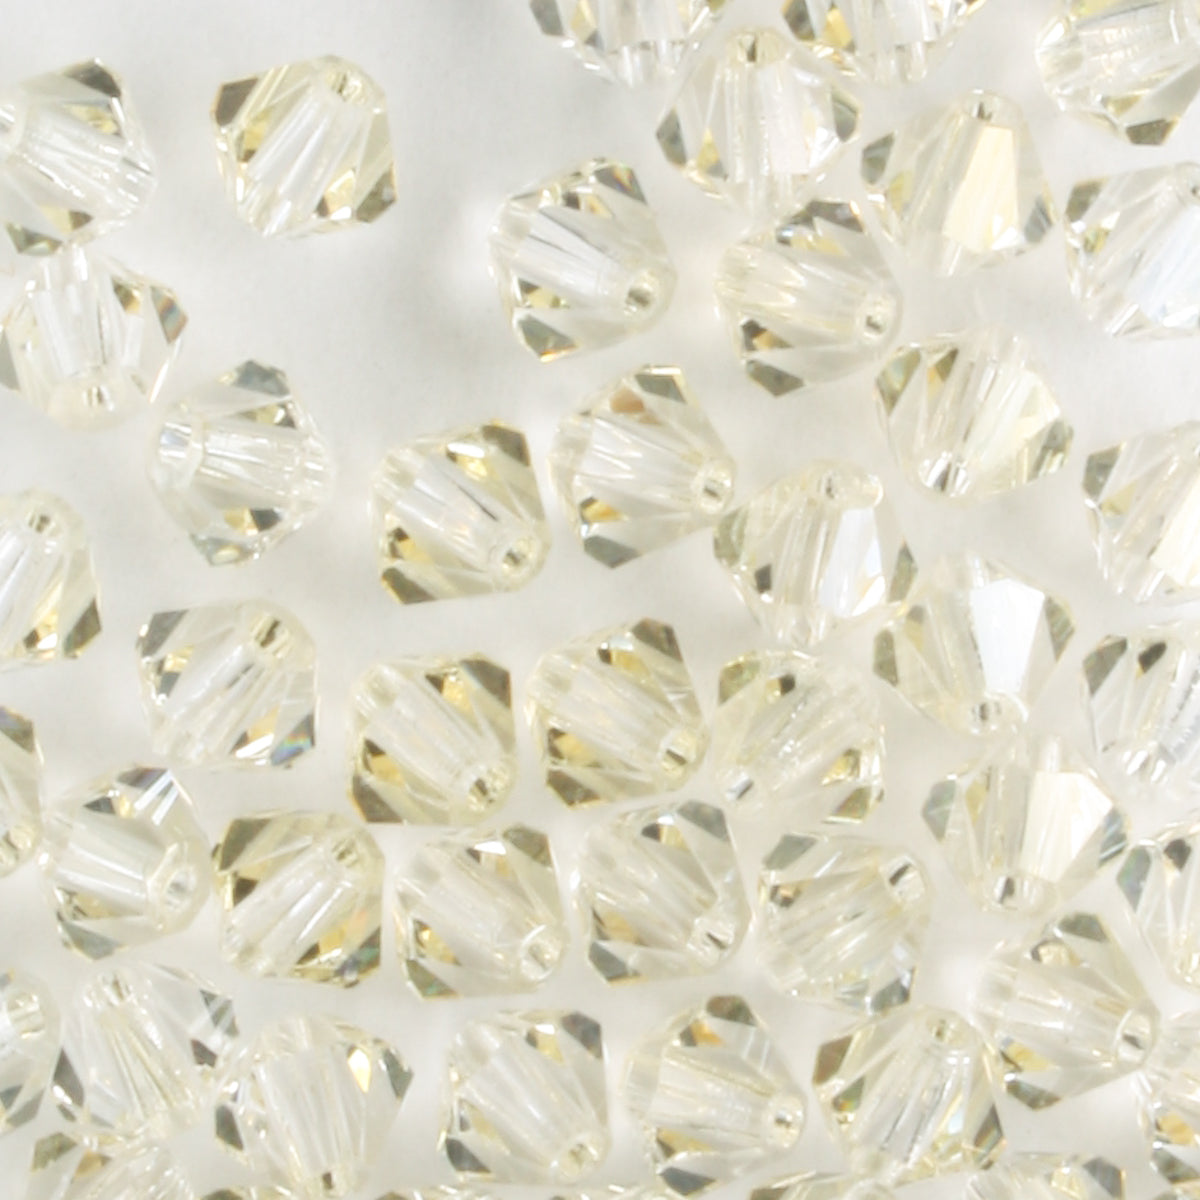 4mm Bicone Crystal Blond Flare - 48 beads